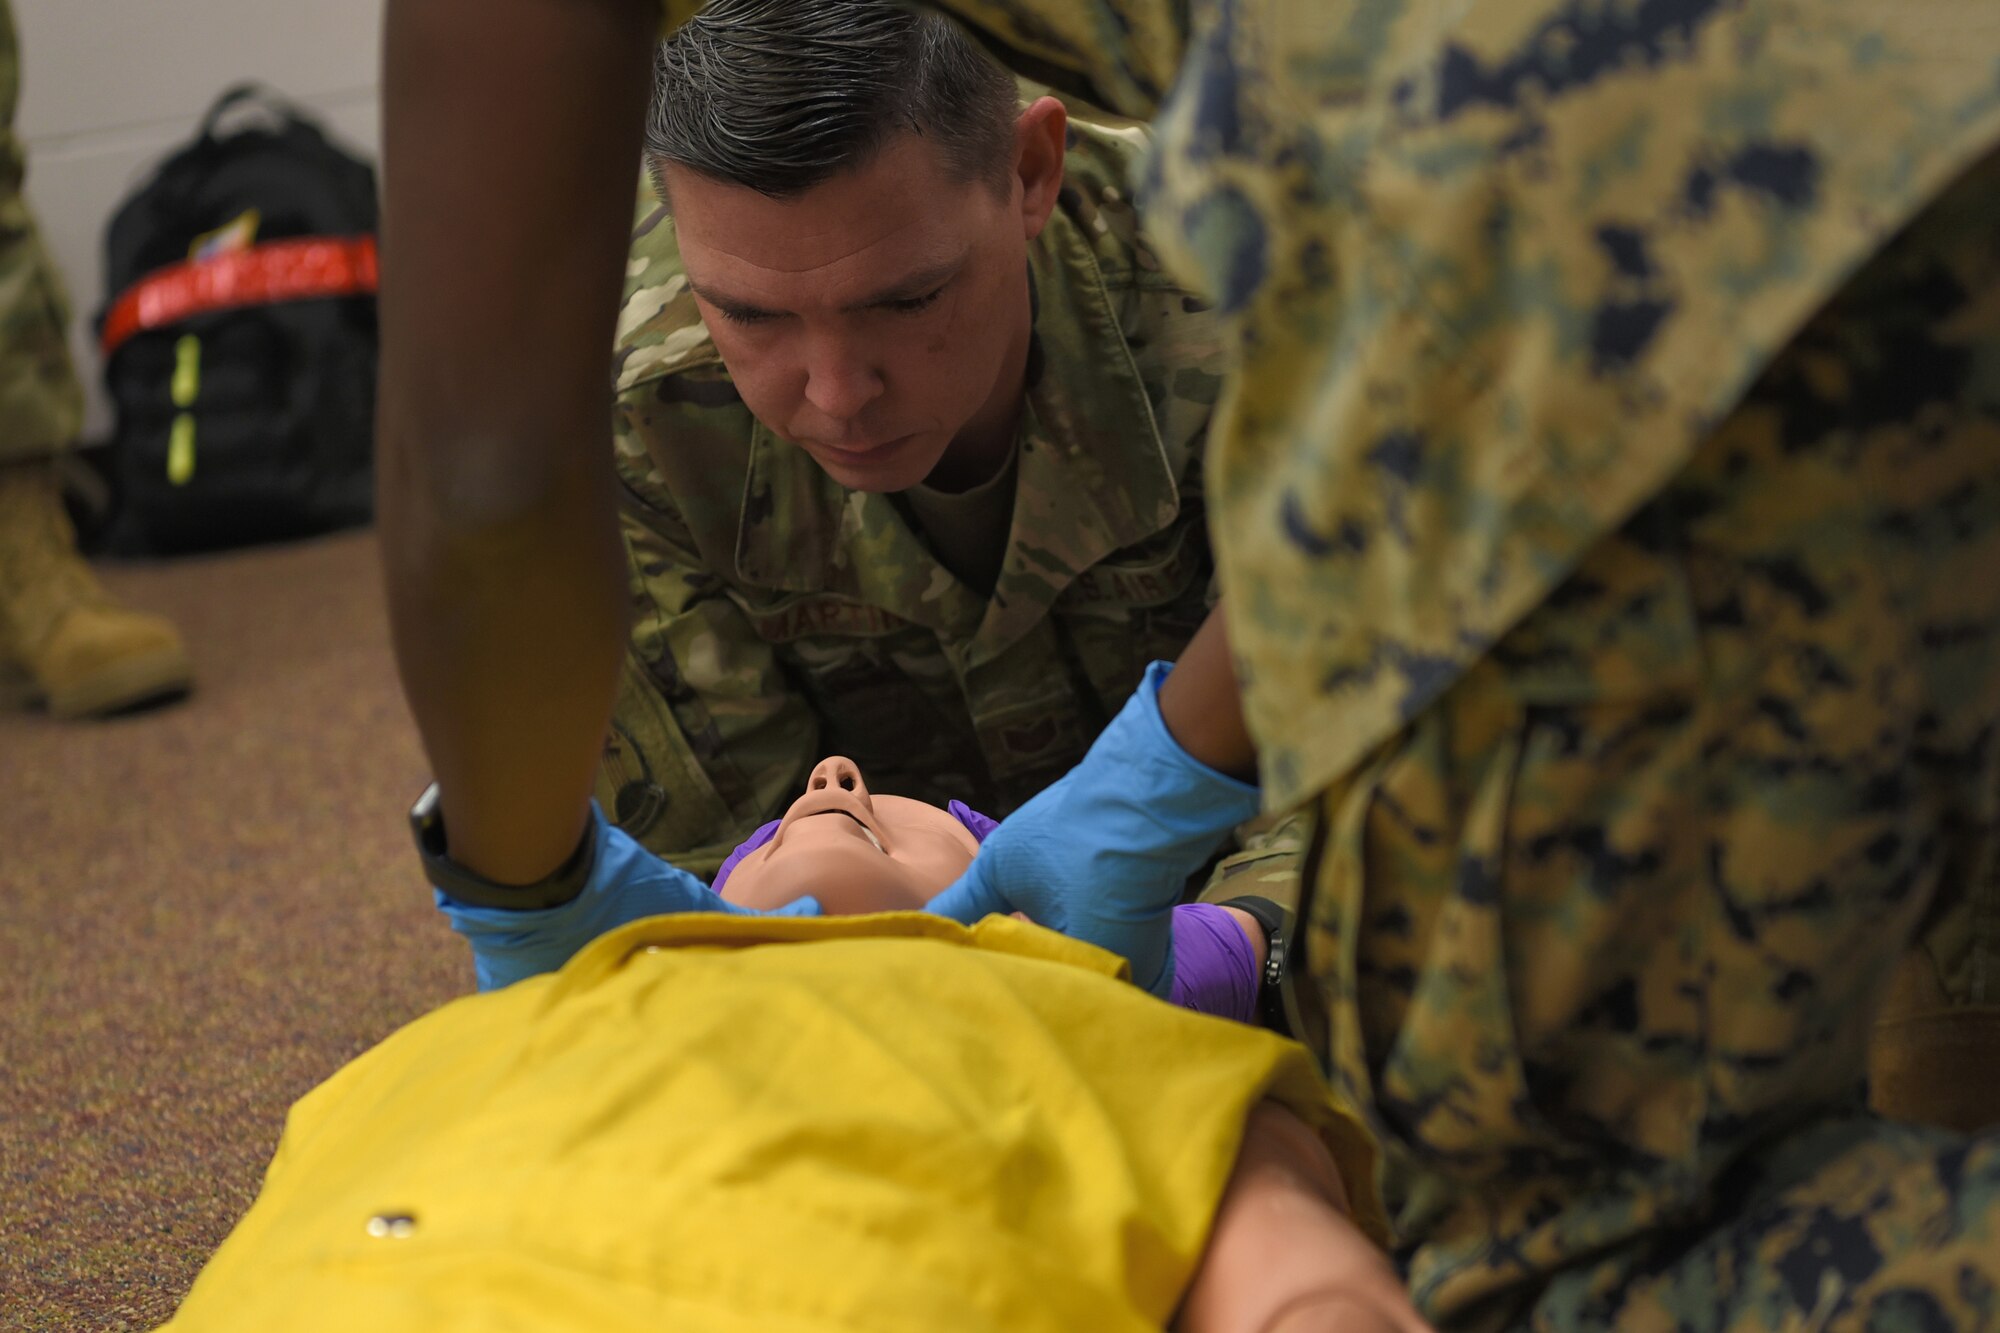 U.S. Air Force Tech Sgt. Brandon Martin, 312th Training Squadron instructor, demonstrates C-spine stabilization for joint service students of the Louis F. Garland Department of Defense Fire Academy at Goodfellow Air Force Base, Texas, May 6, 2022. The students learned Emergency Medical Responder skills before their psychomotor evaluation. (U.S. Air Force photo by Senior Airman Abbey Rieves)